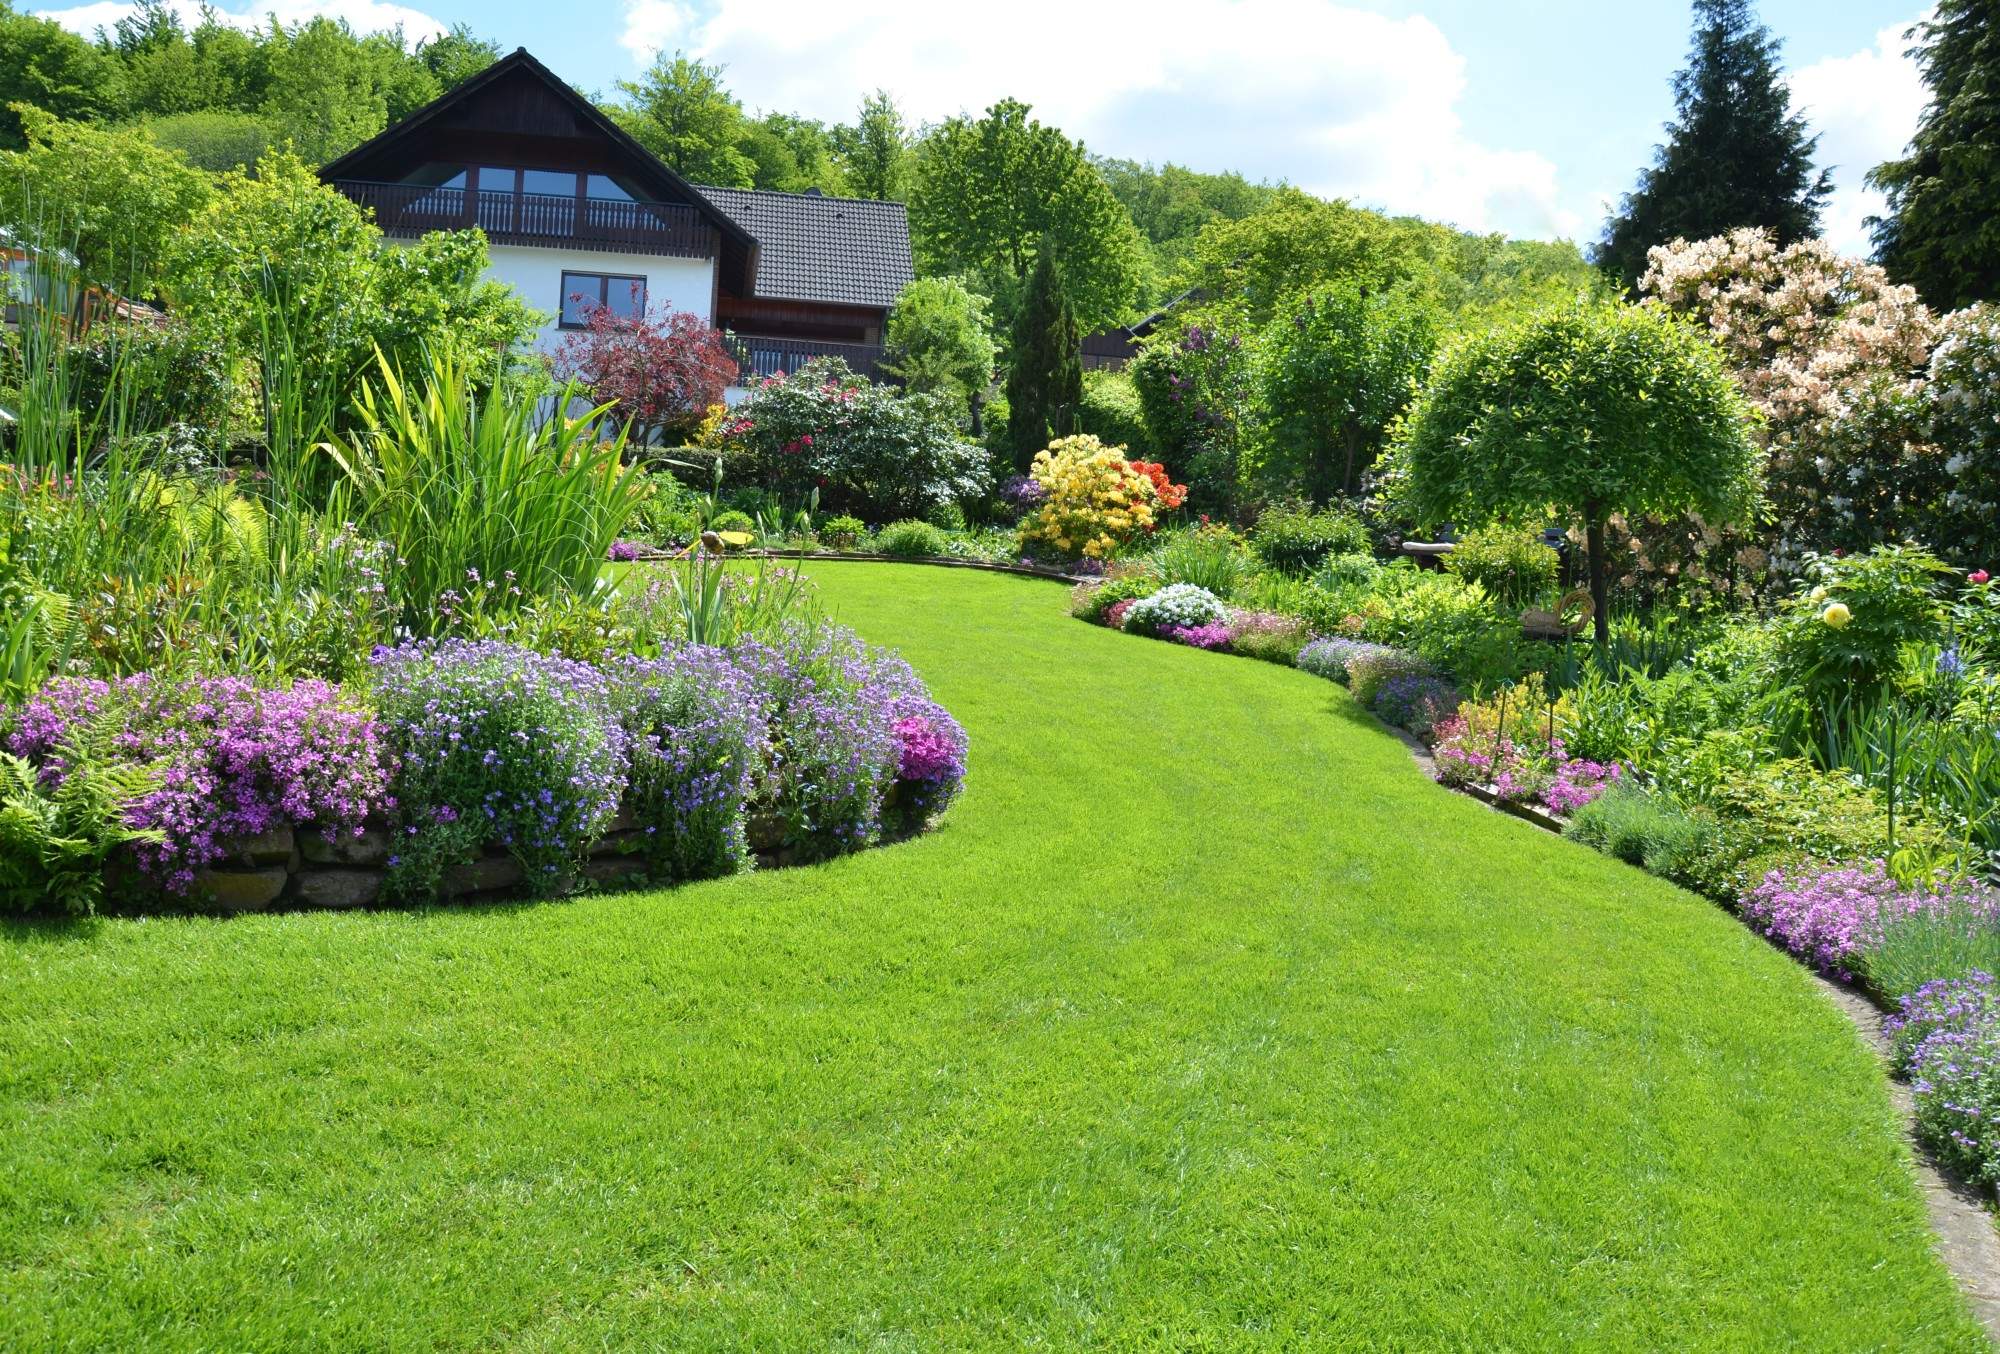 How to Avoid the Most Common Residential Landscaping Mistakes